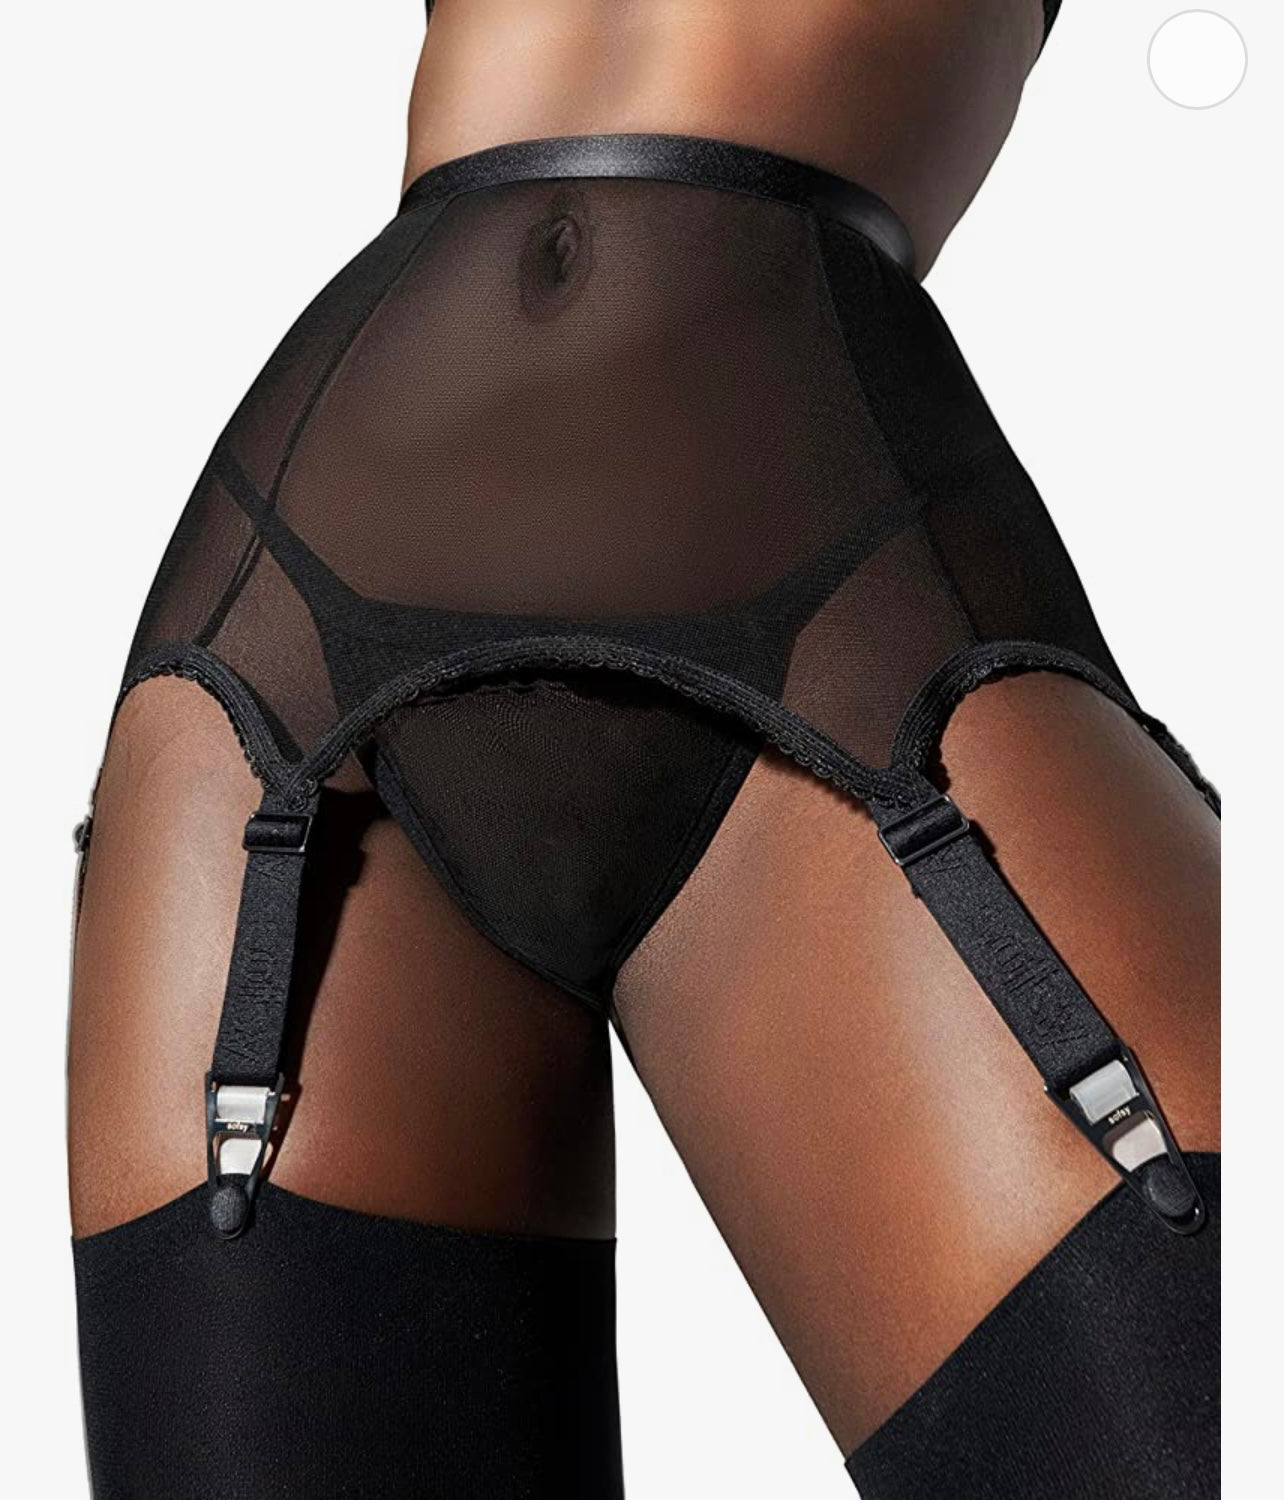 sofsy Mesh Garter Belt with 6 Straps for Thigh High Stockings/Lingerie pic picture